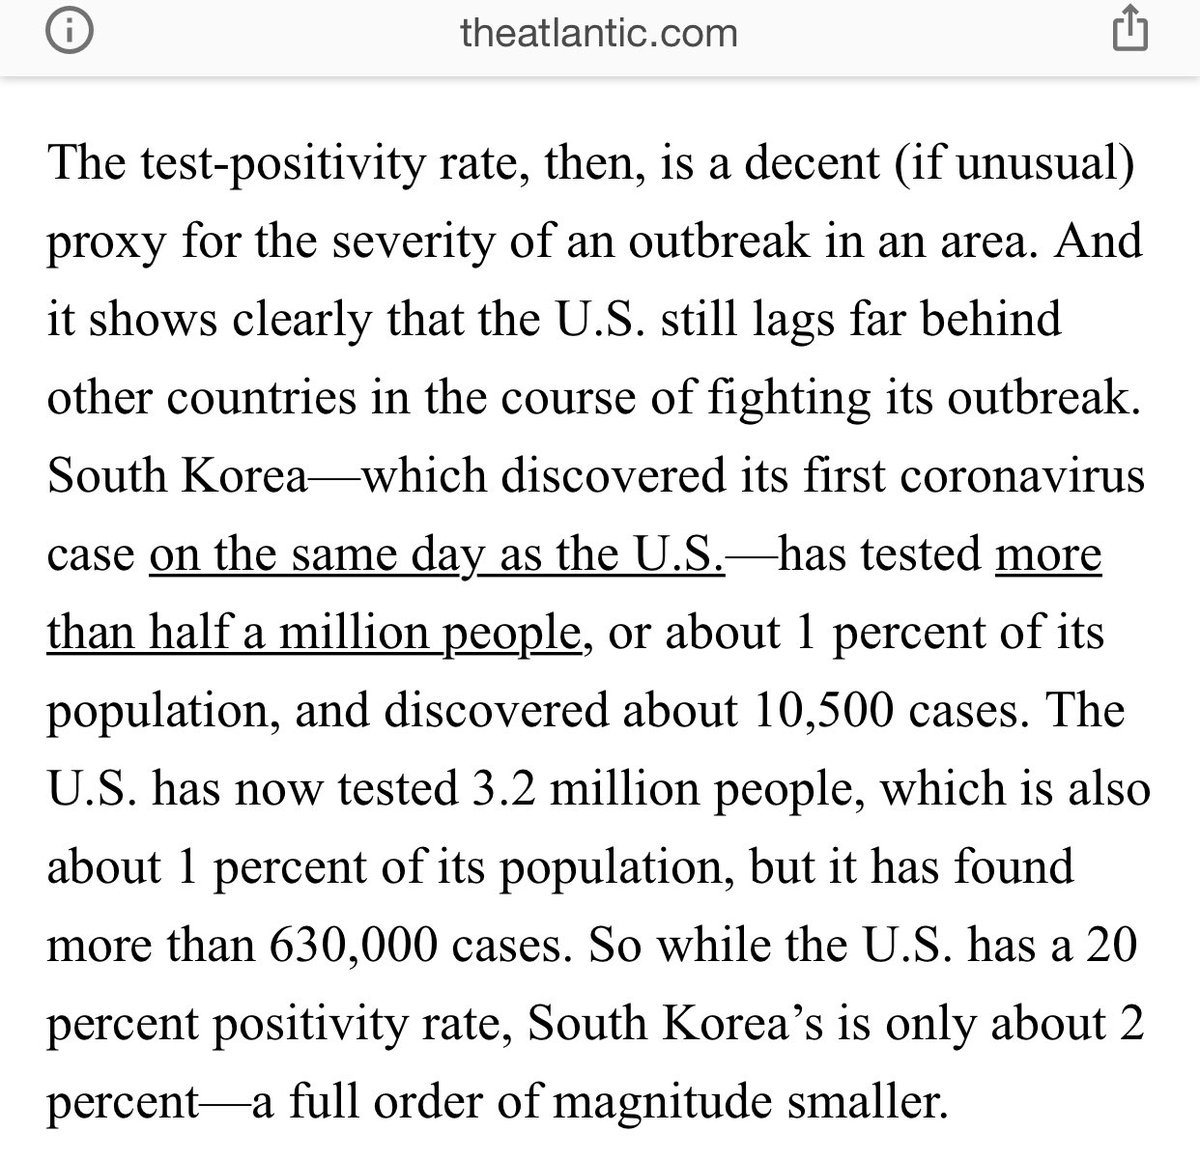 8) hence, no single statistic is perfect - they all need to be read in context of population, testing volume, undertesting. What % positivity shows is relative lack of testing/severity. South Korea had 2% positivity, as did others. Positivity rate is a “decent proxy for severity”